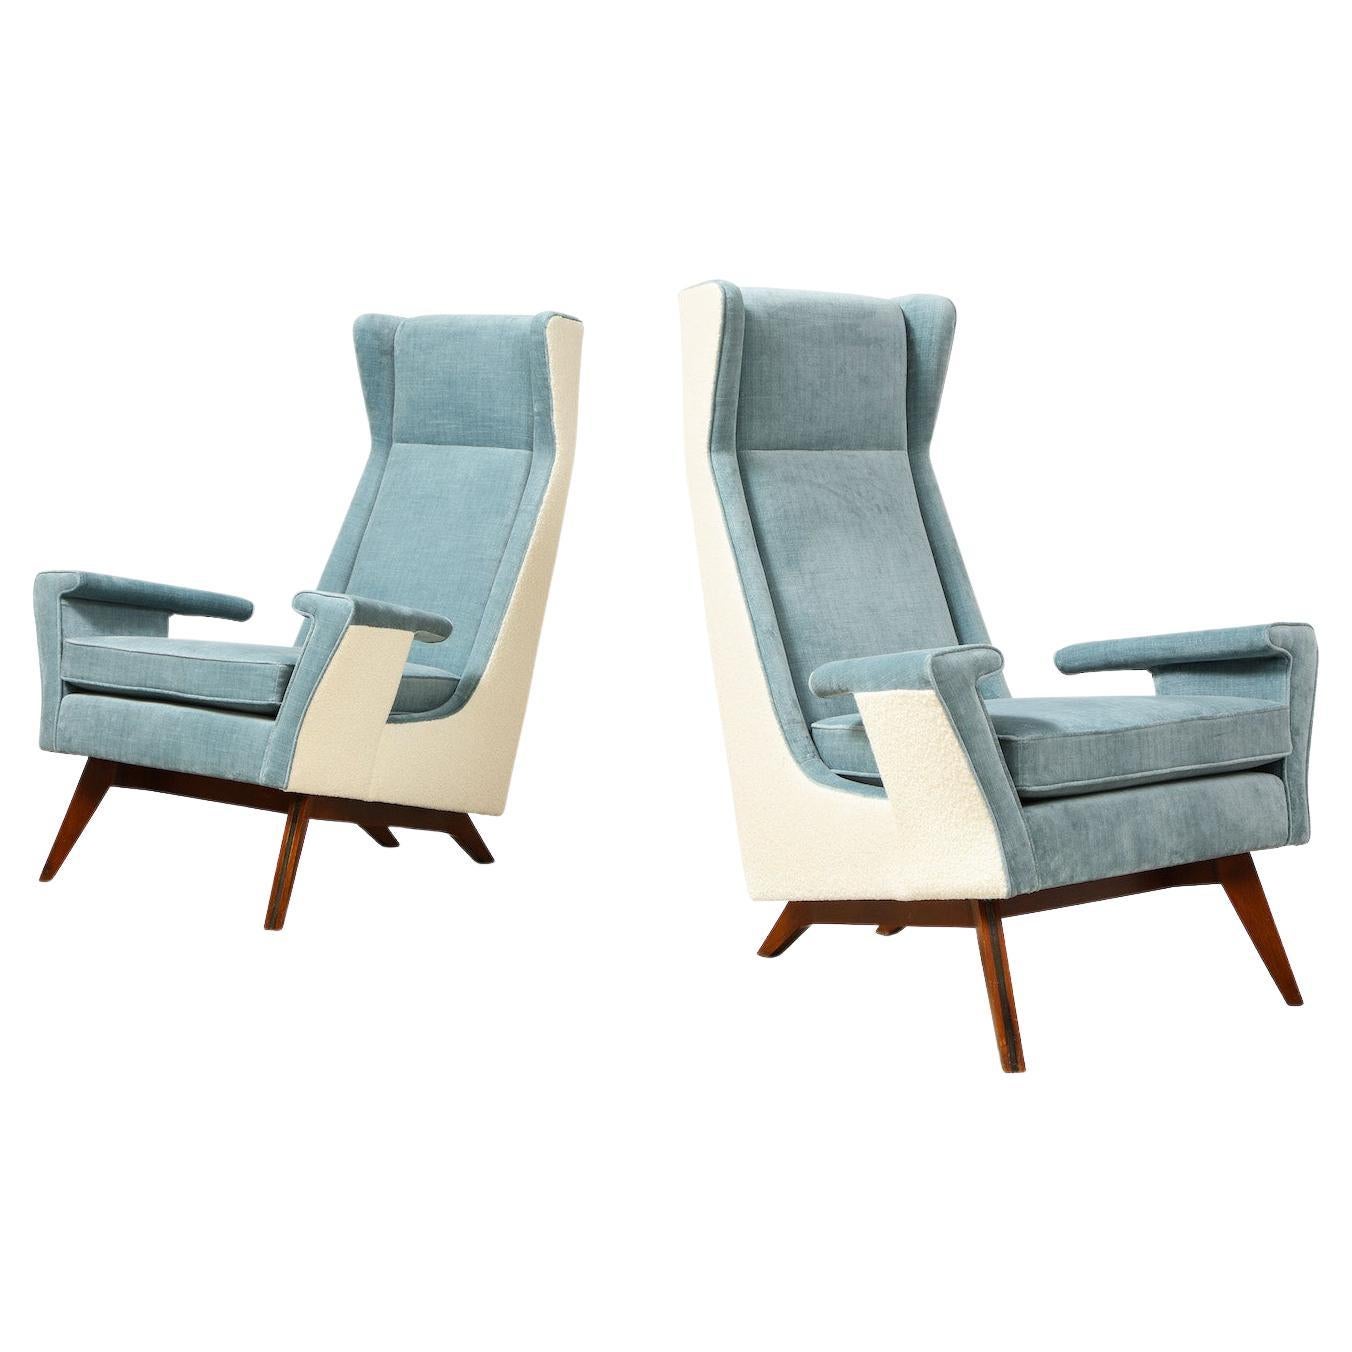 Rare Pair of Armchairs by Gino Levi-Montalcini For Sale